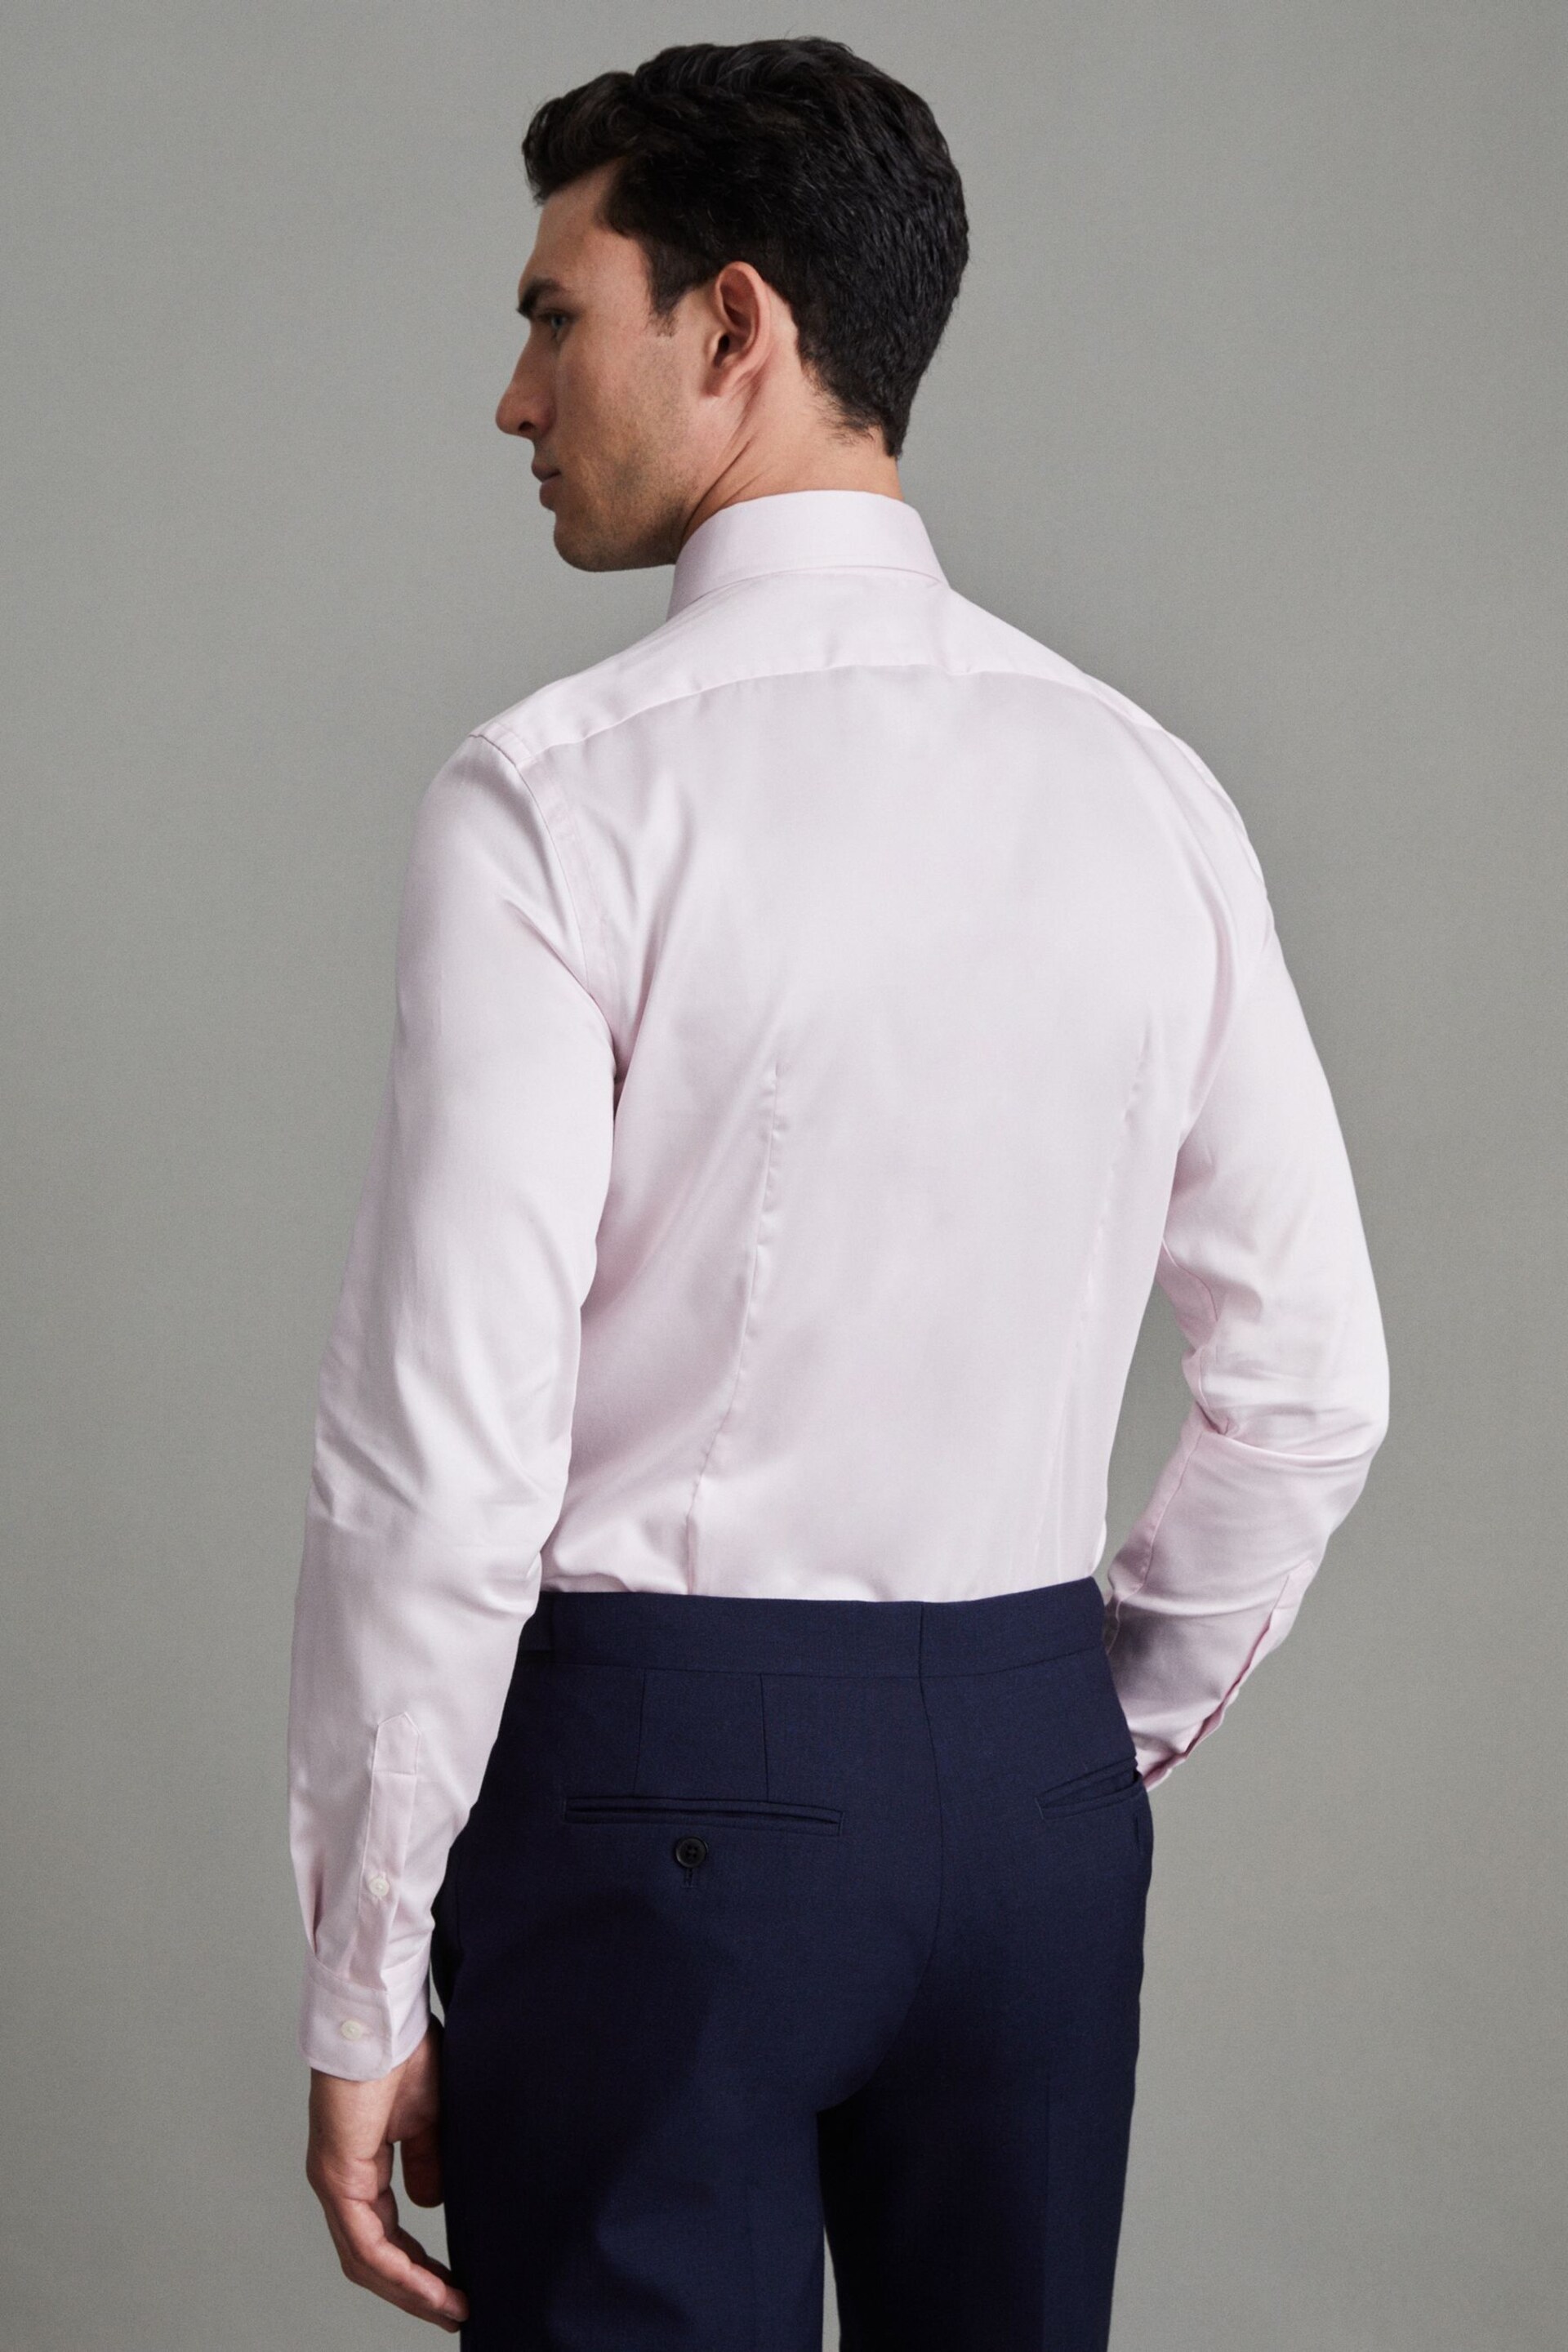 Reiss Pink Remote Slim Fit Cotton Sateen Shirt - Image 4 of 6